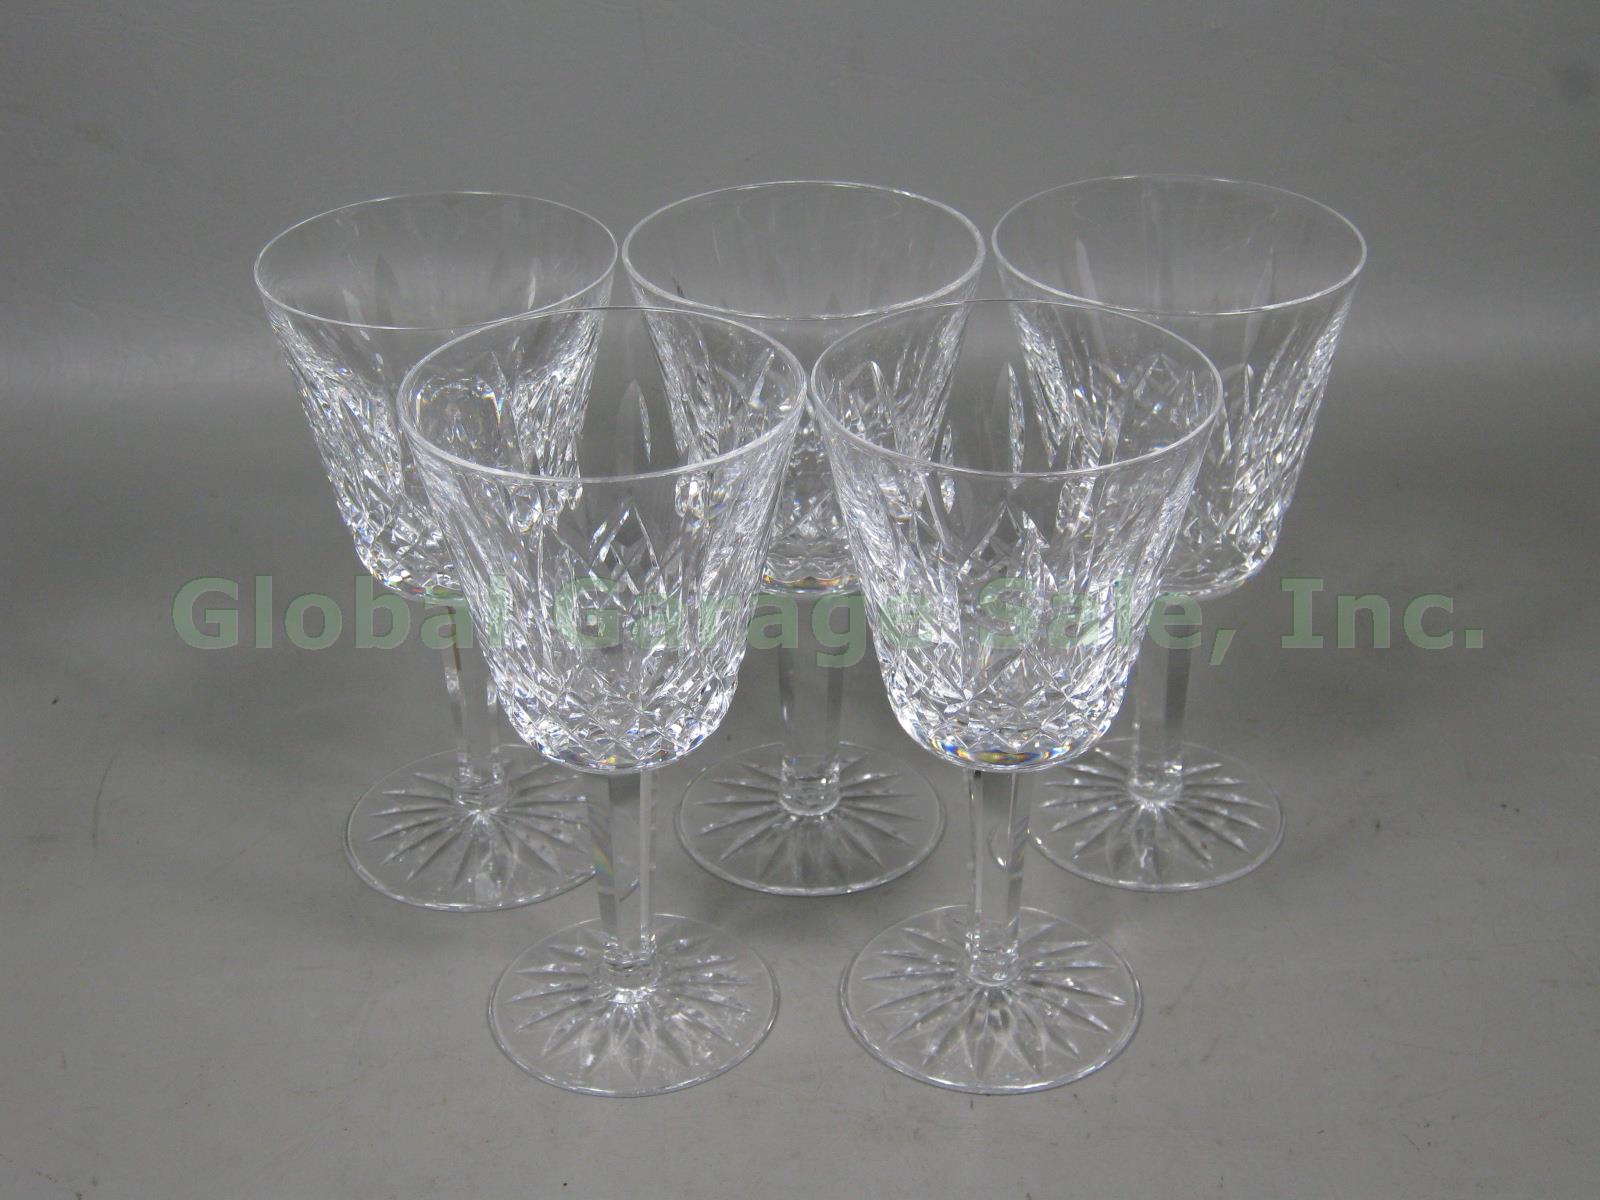 5 Waterford Crystal Lismore Claret Wine Glasses 5-7/8" Original Owner Bought New